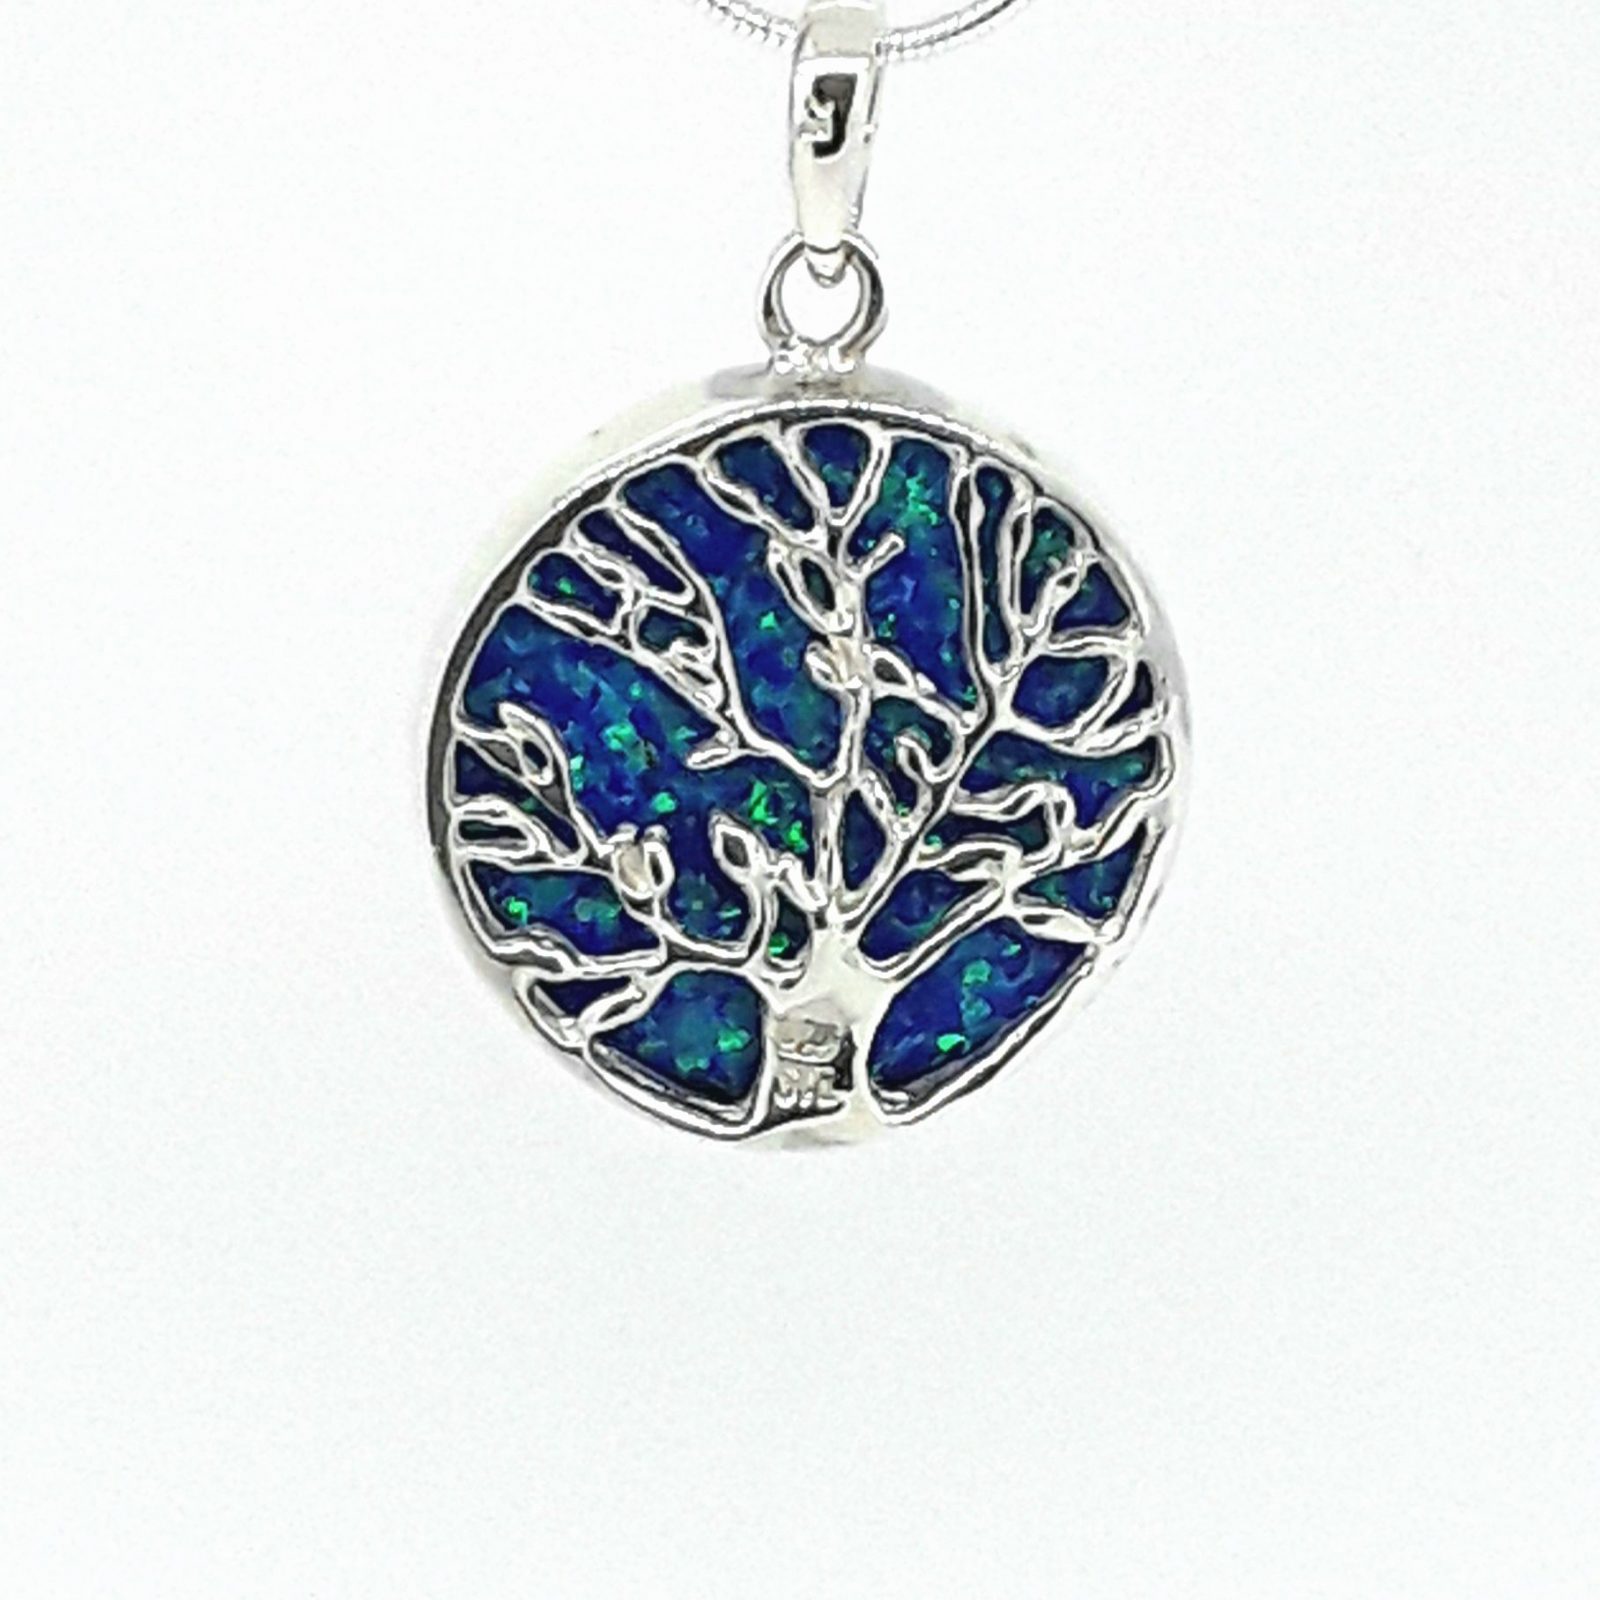 Free Instructions For Tree Of Life Pendant Printable